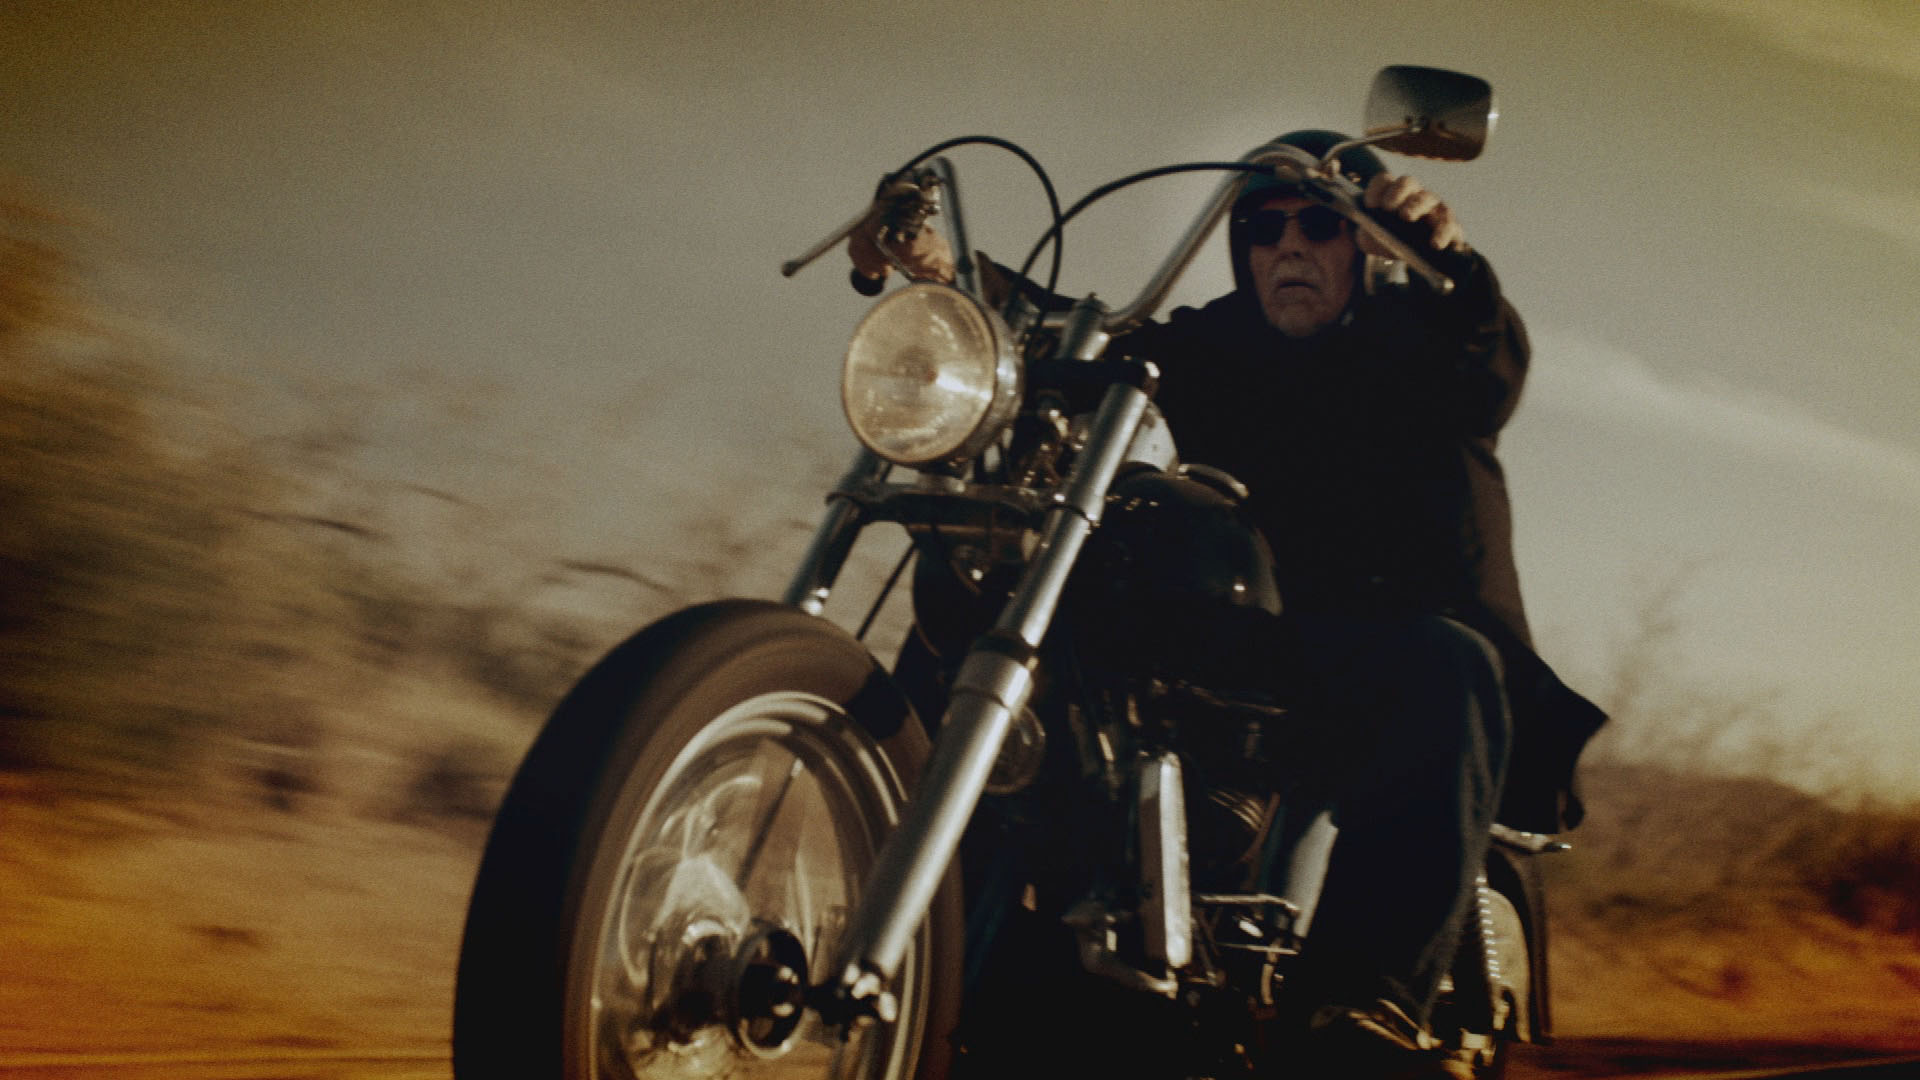 Sonny Vs - George - Motorcycle From Outlaw Chronicles - HD Wallpaper 